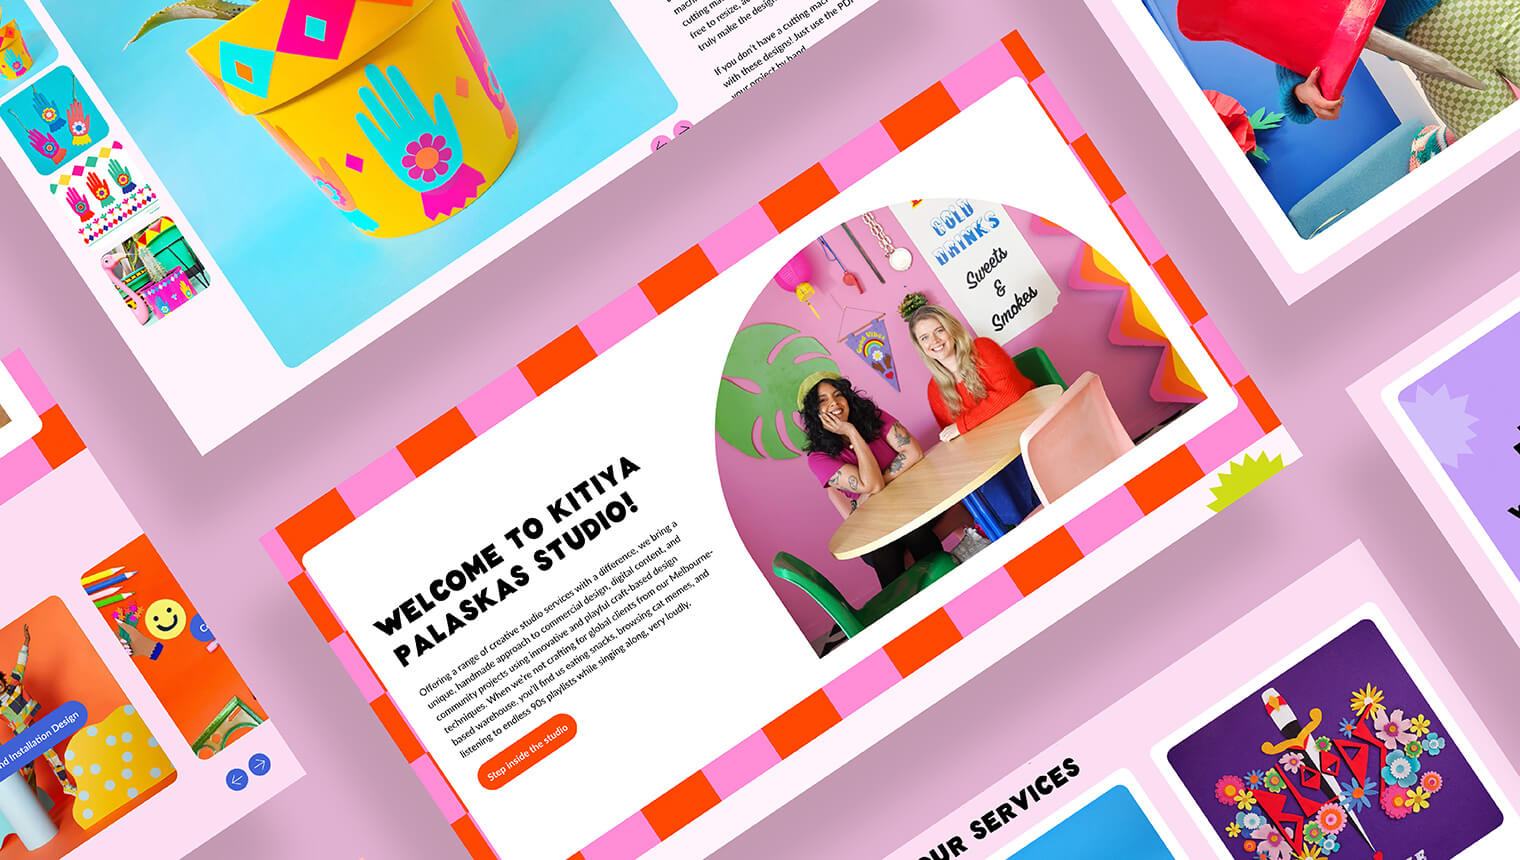 Brand design portfolio showcasing several pages of the Kitiya Palaskas Shopify website design. The pages look bold and colourful and feature bright patterns and brand photography.